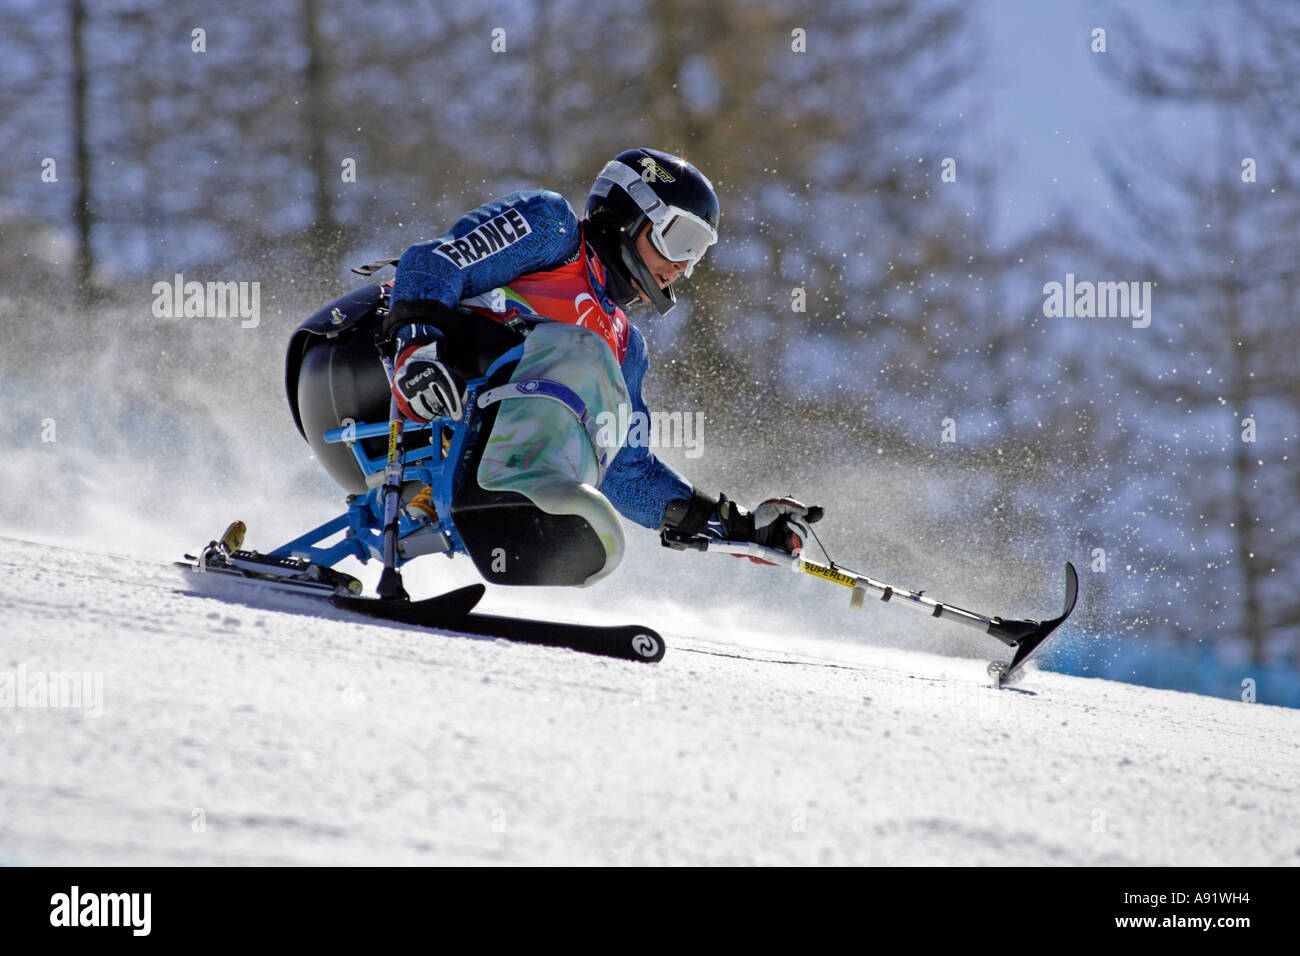 Yohann Taberlet LW12 1 of France in the Mens Alpine Skiing Super G Sitting competition Stock Photo